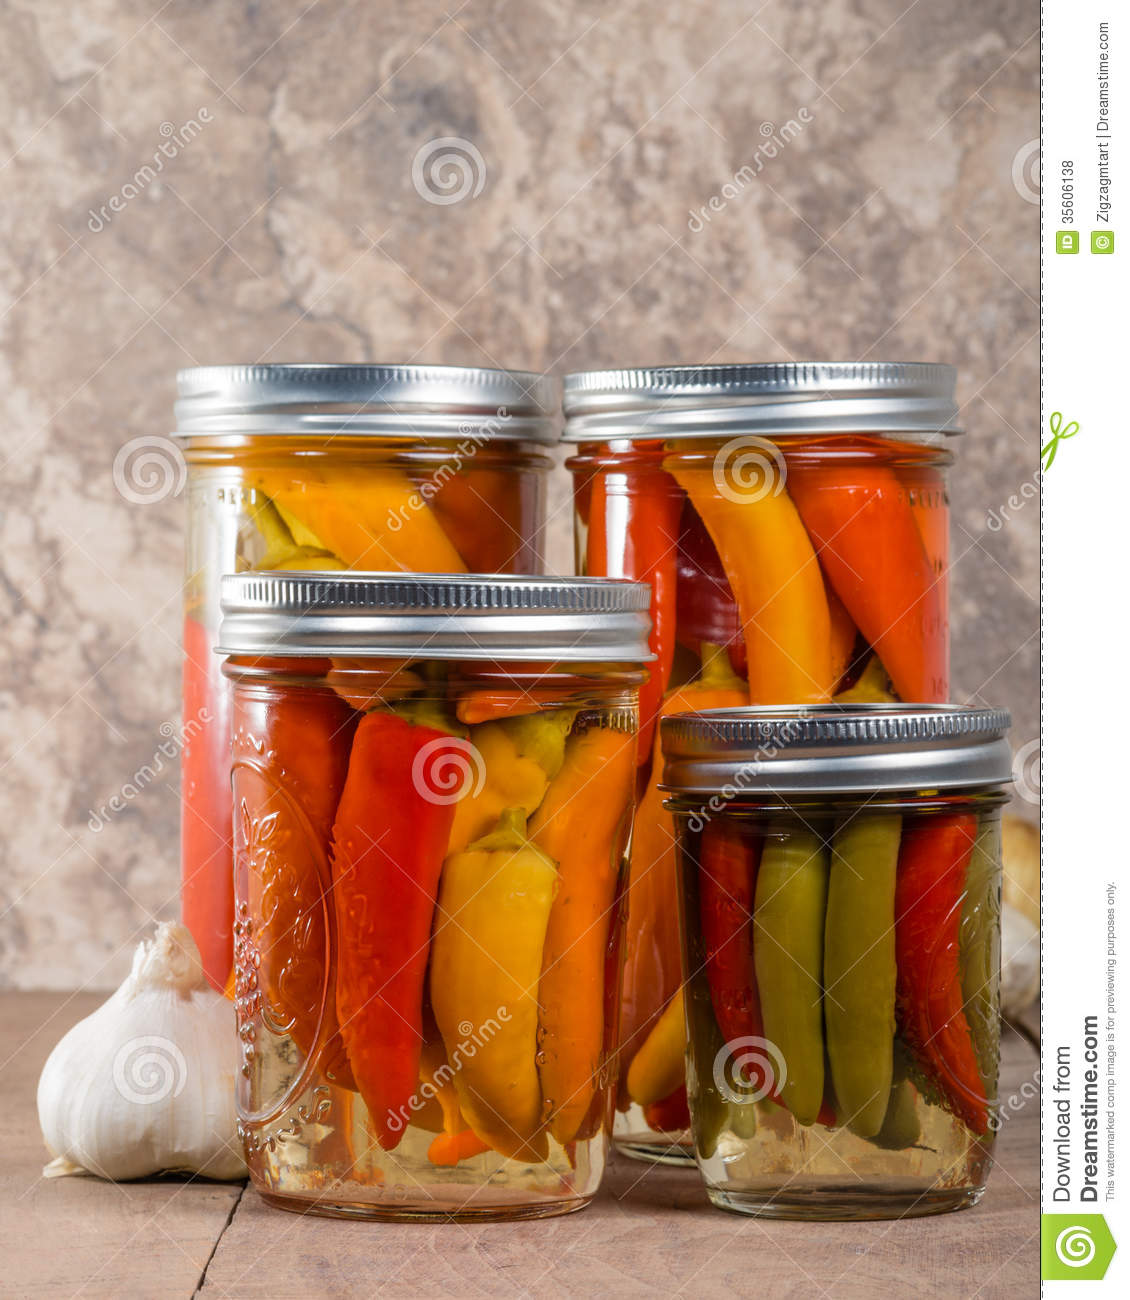 Homemade Pickled Hot Peppers In Mason Jars 